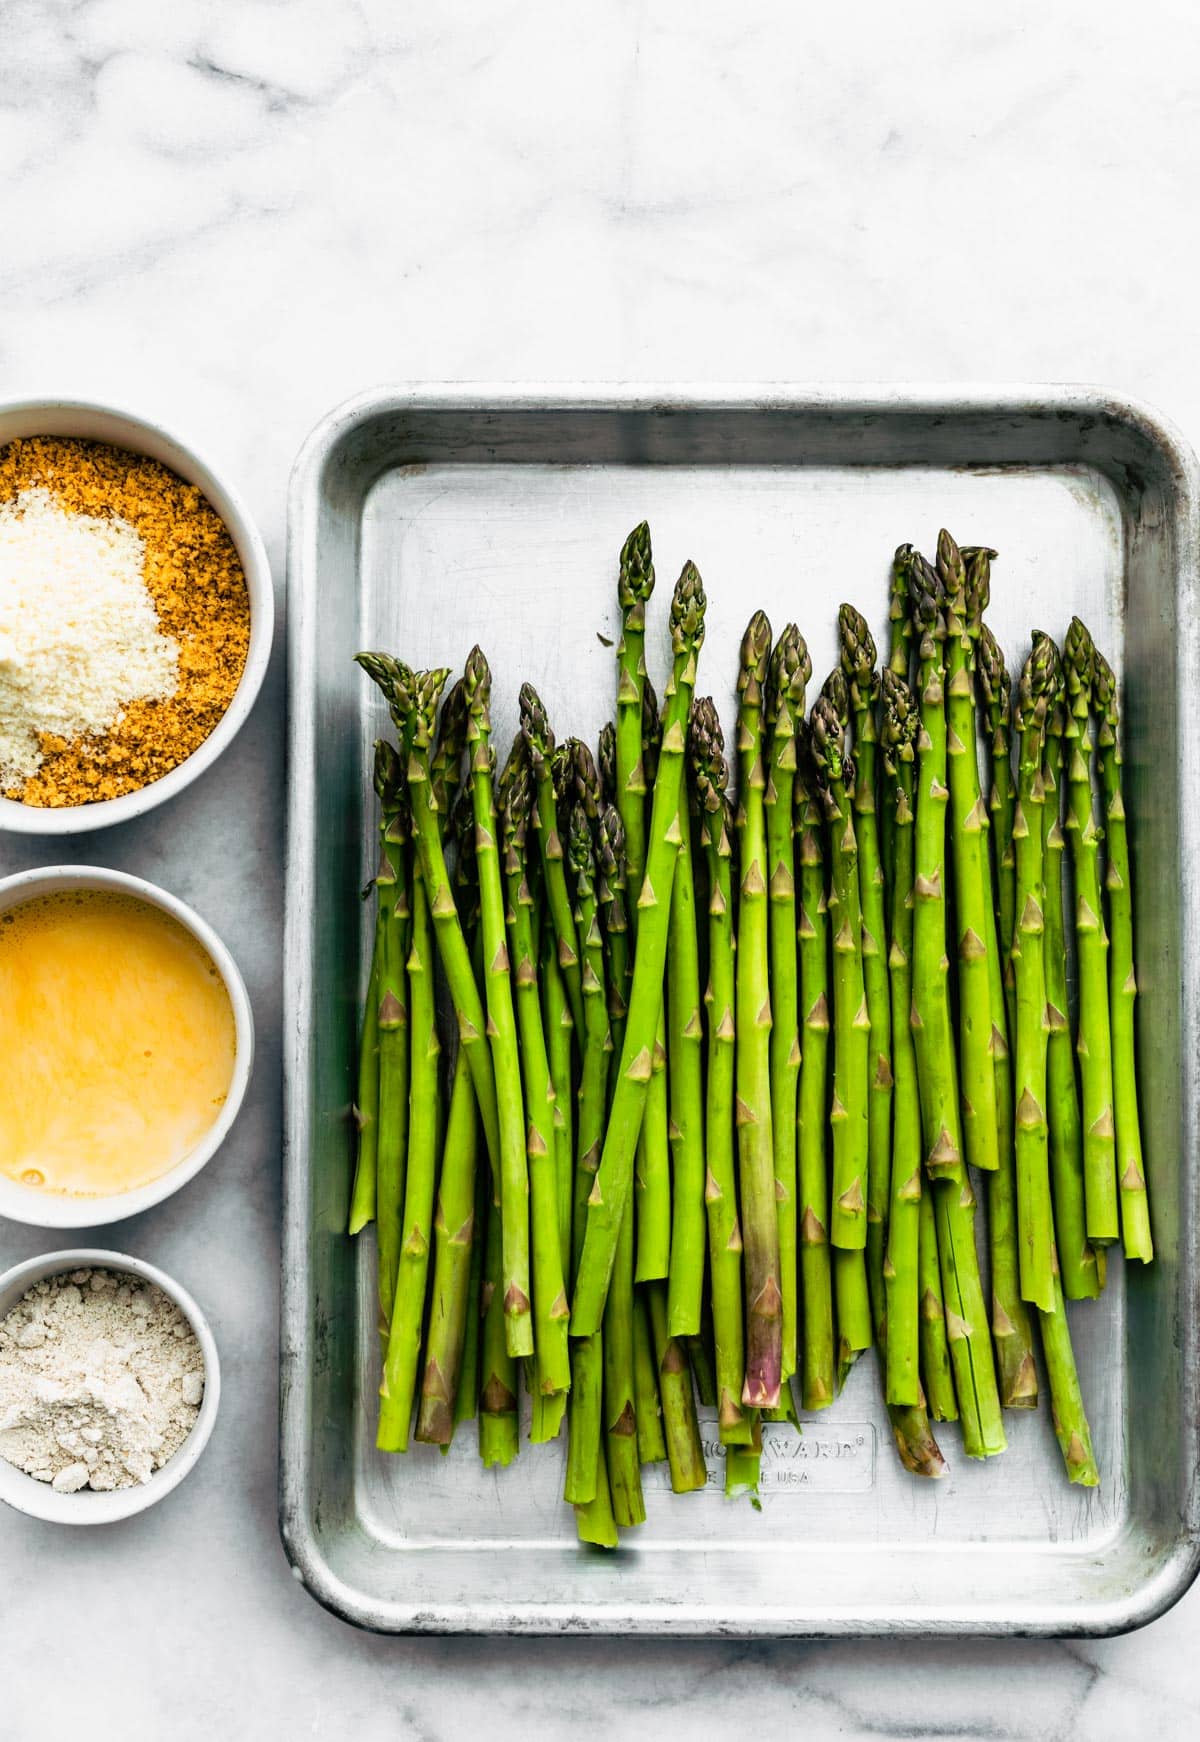 Spears of asparagus in a baking dish, a bowl of gluten-free breadcrumbs, a bowl of whisked eggs, and Parmesan.